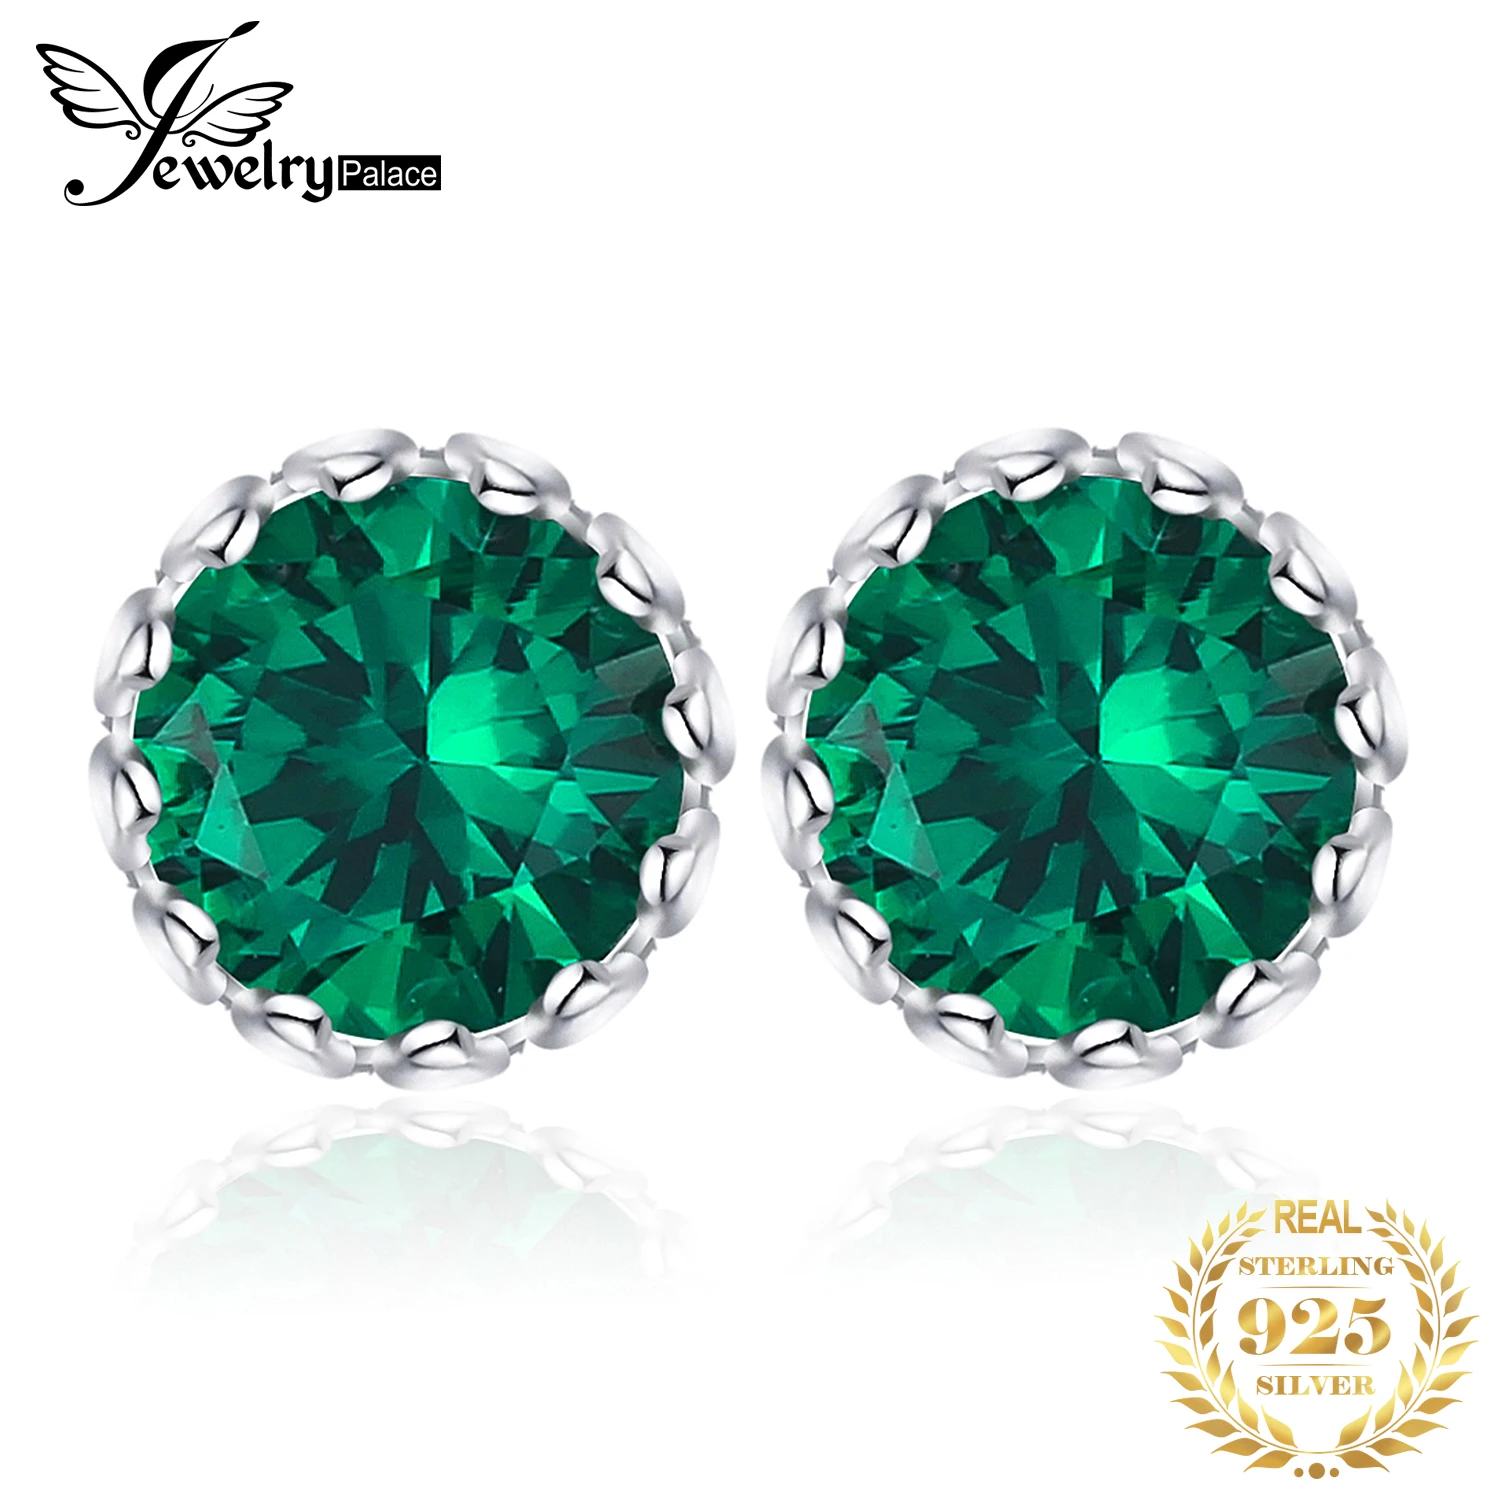 JewelryPalace Round Green Simulated Nano Emerald 925 Sterling Silver Stud Earrings for Women Fashion Statement Gemstone Jewelry